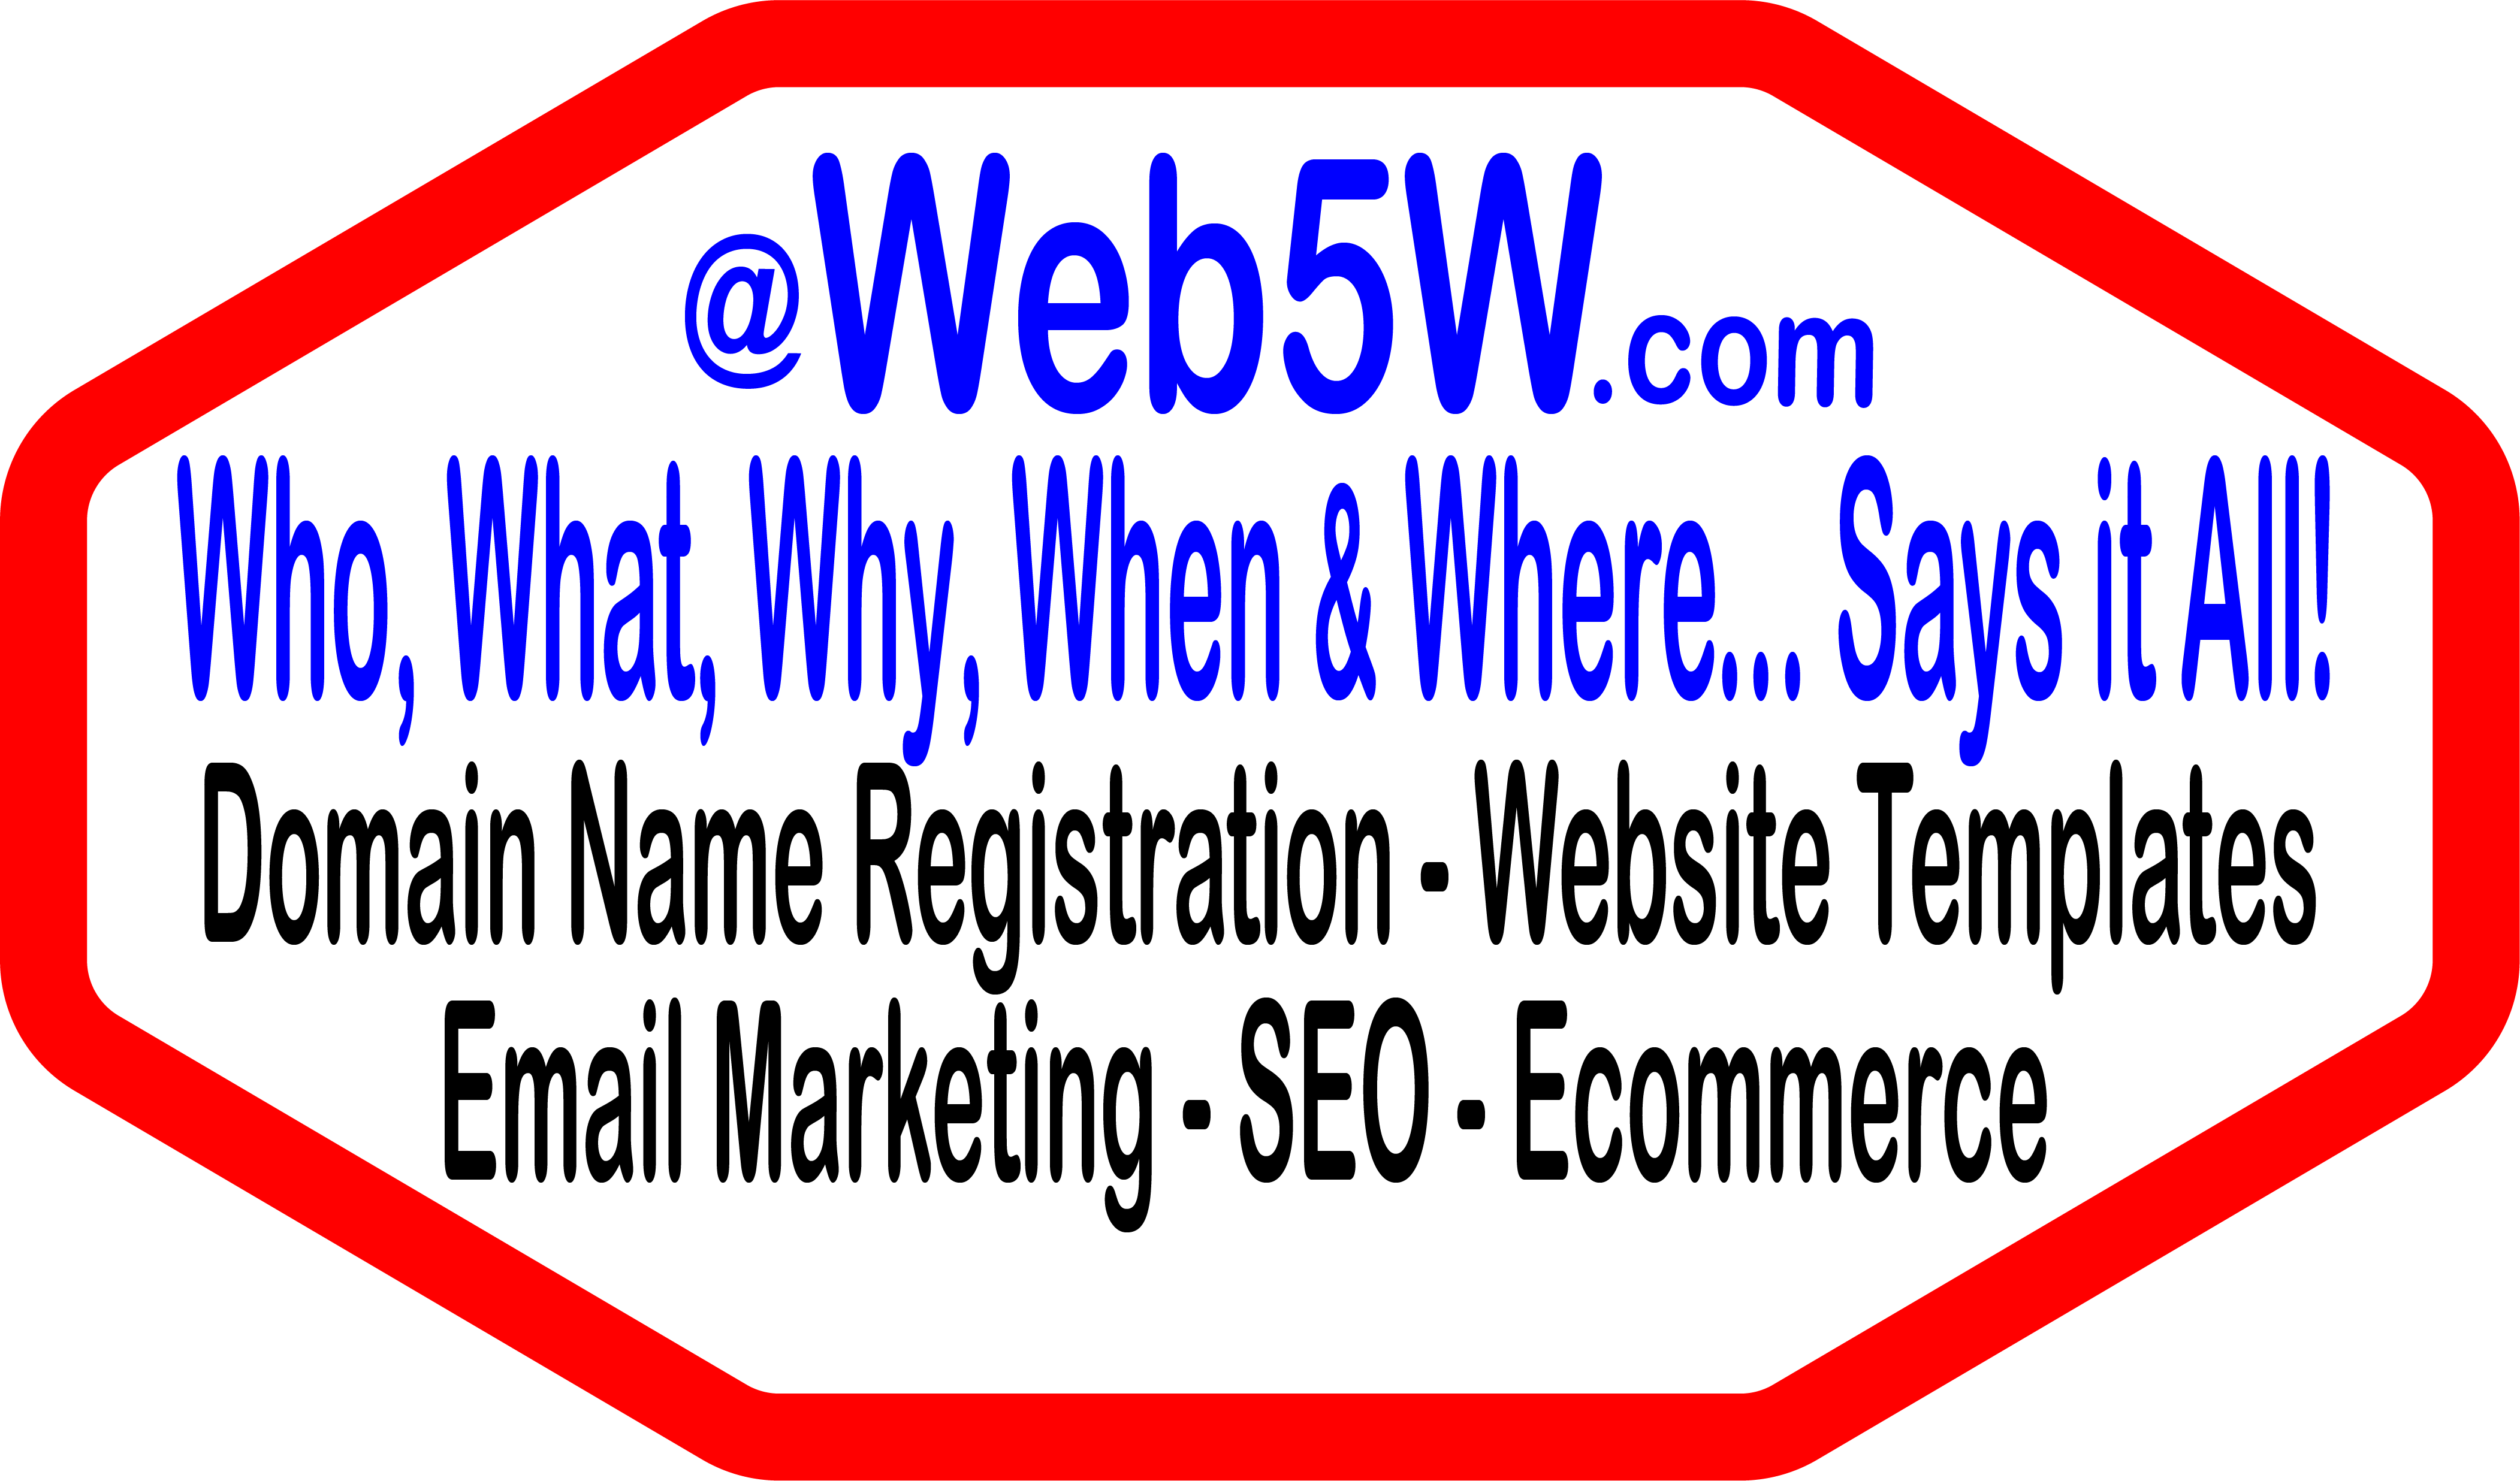 Web5W because Who, What, Why, When & Where... Says It All!